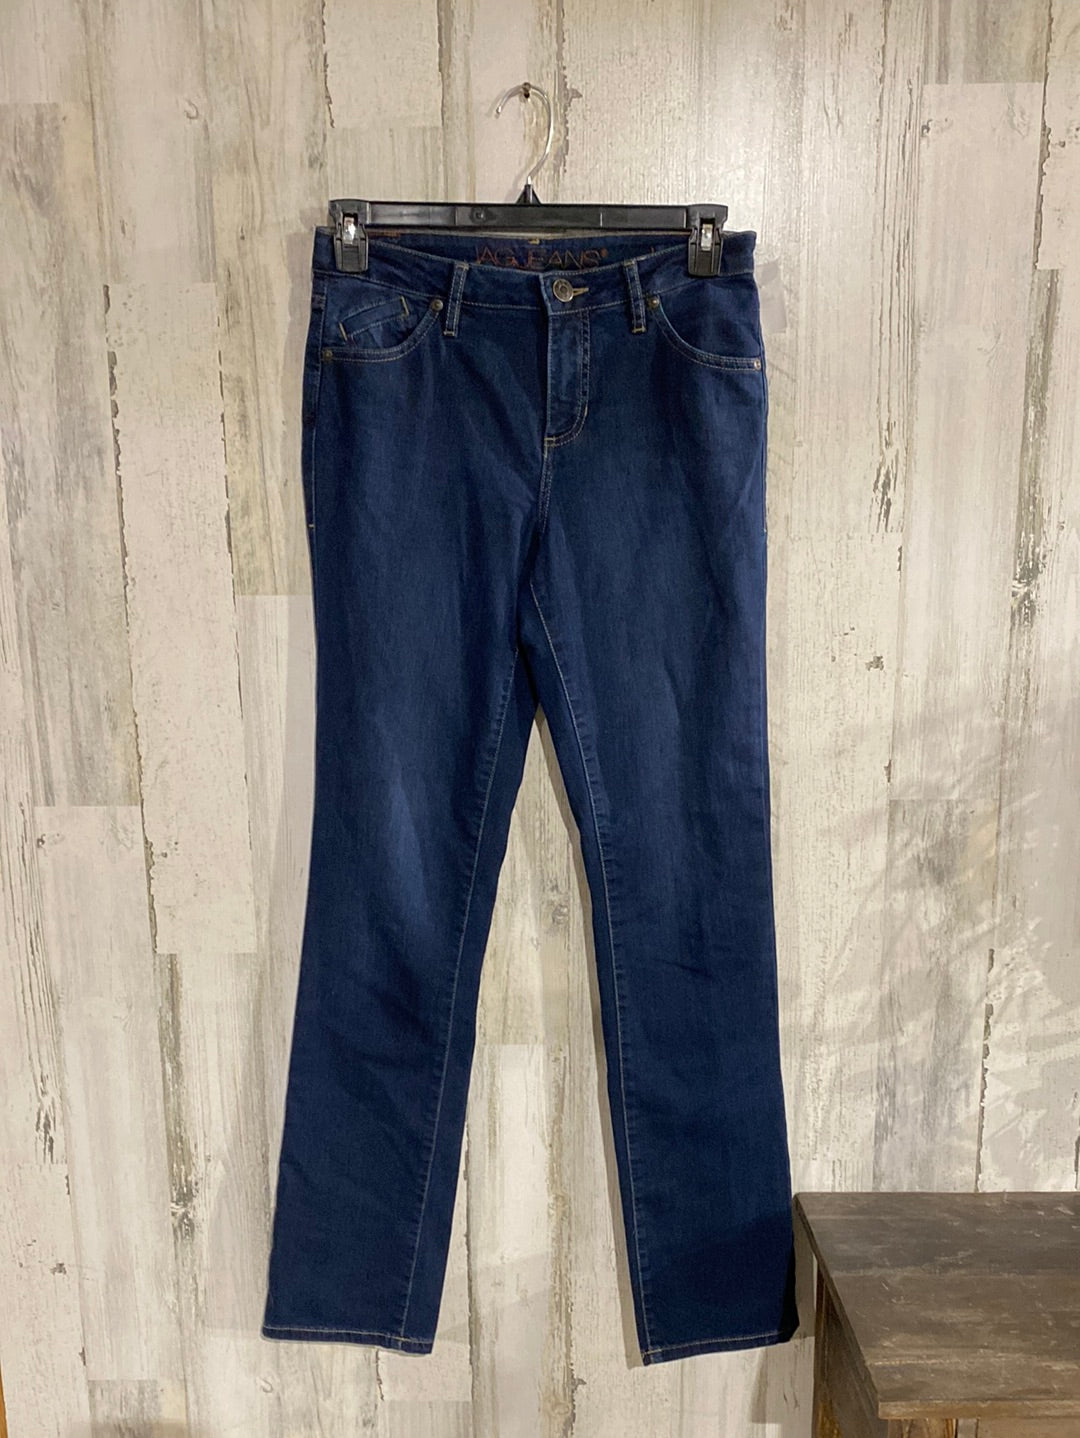 Womens Jag Jeans Size 8 MARKDOWN